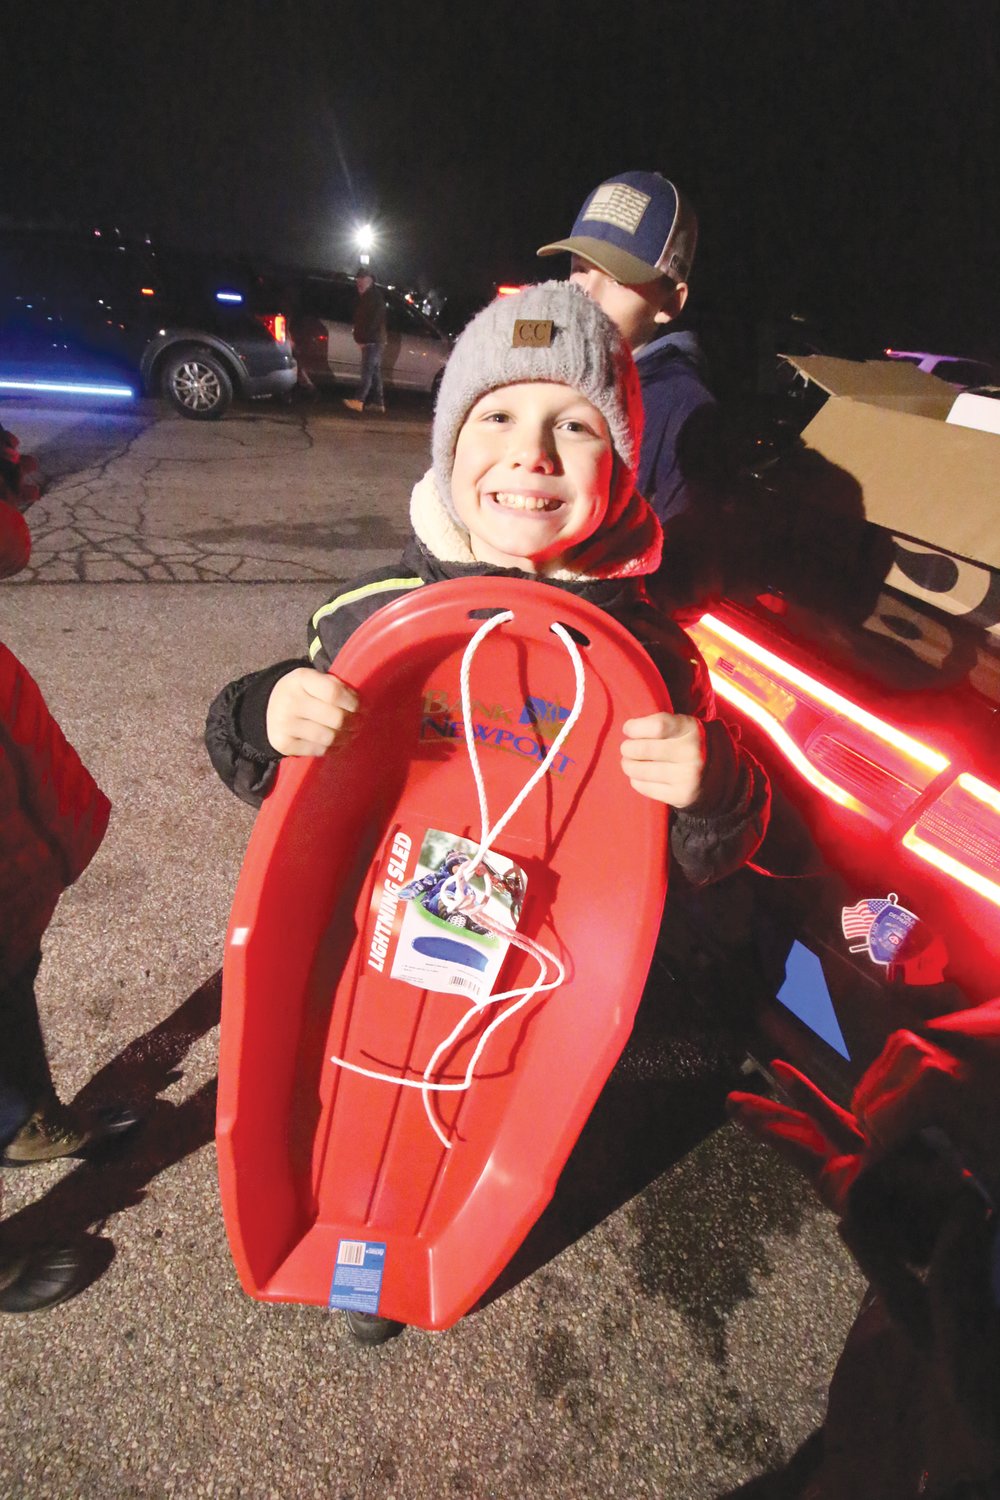 READY FOR SNOW: Sam Barnatowicz flashes a smile after winning one of several sleds provided as prizes in a raffle sponsored by BankNewport.